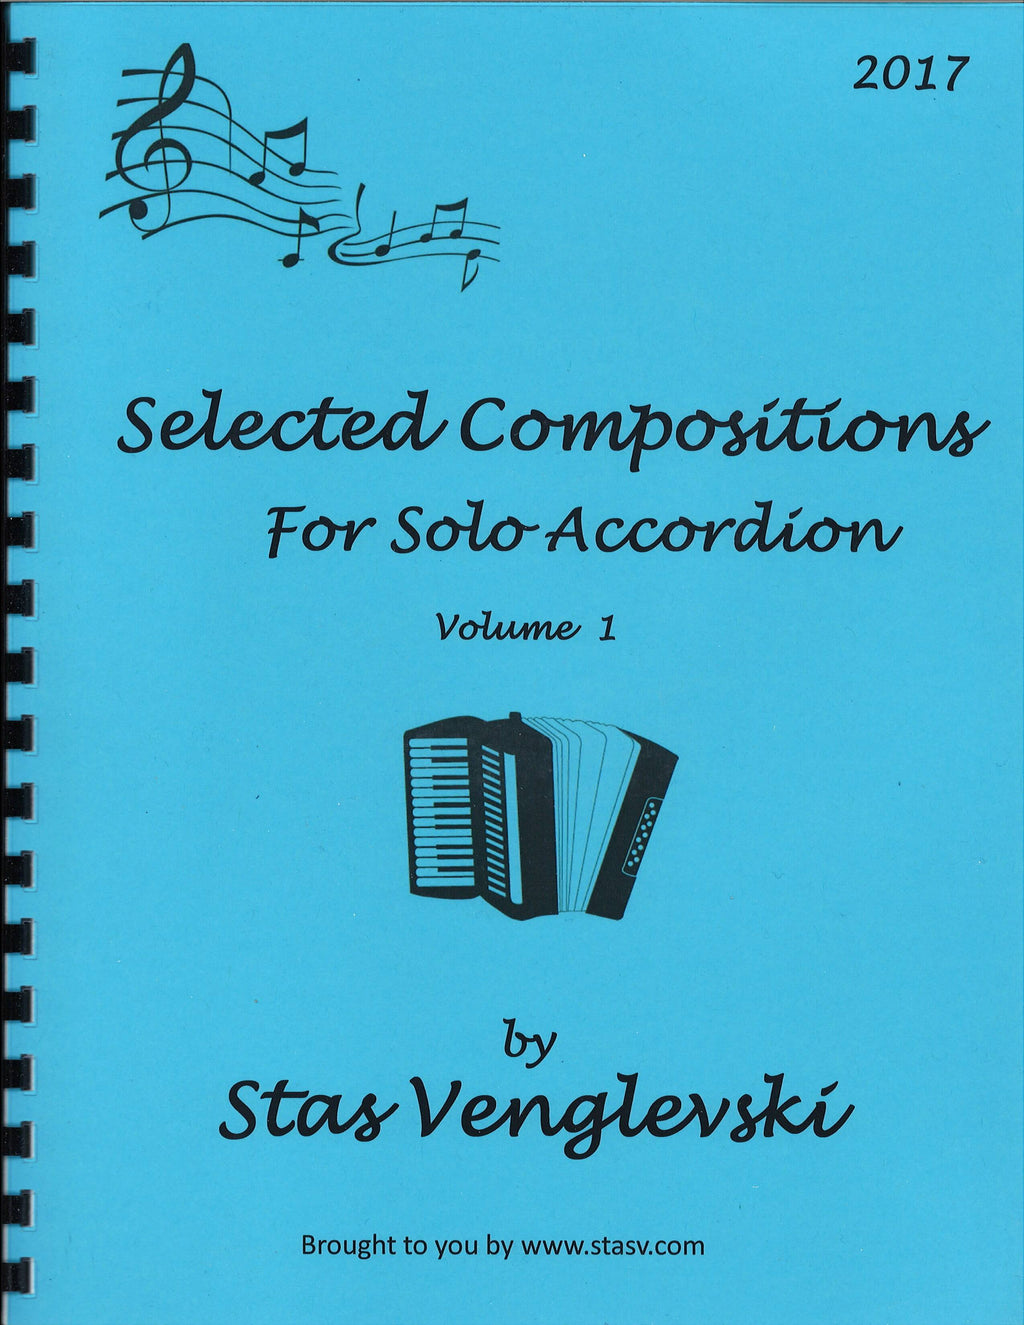 Selected Compositions for Solo Accordion Volume 1